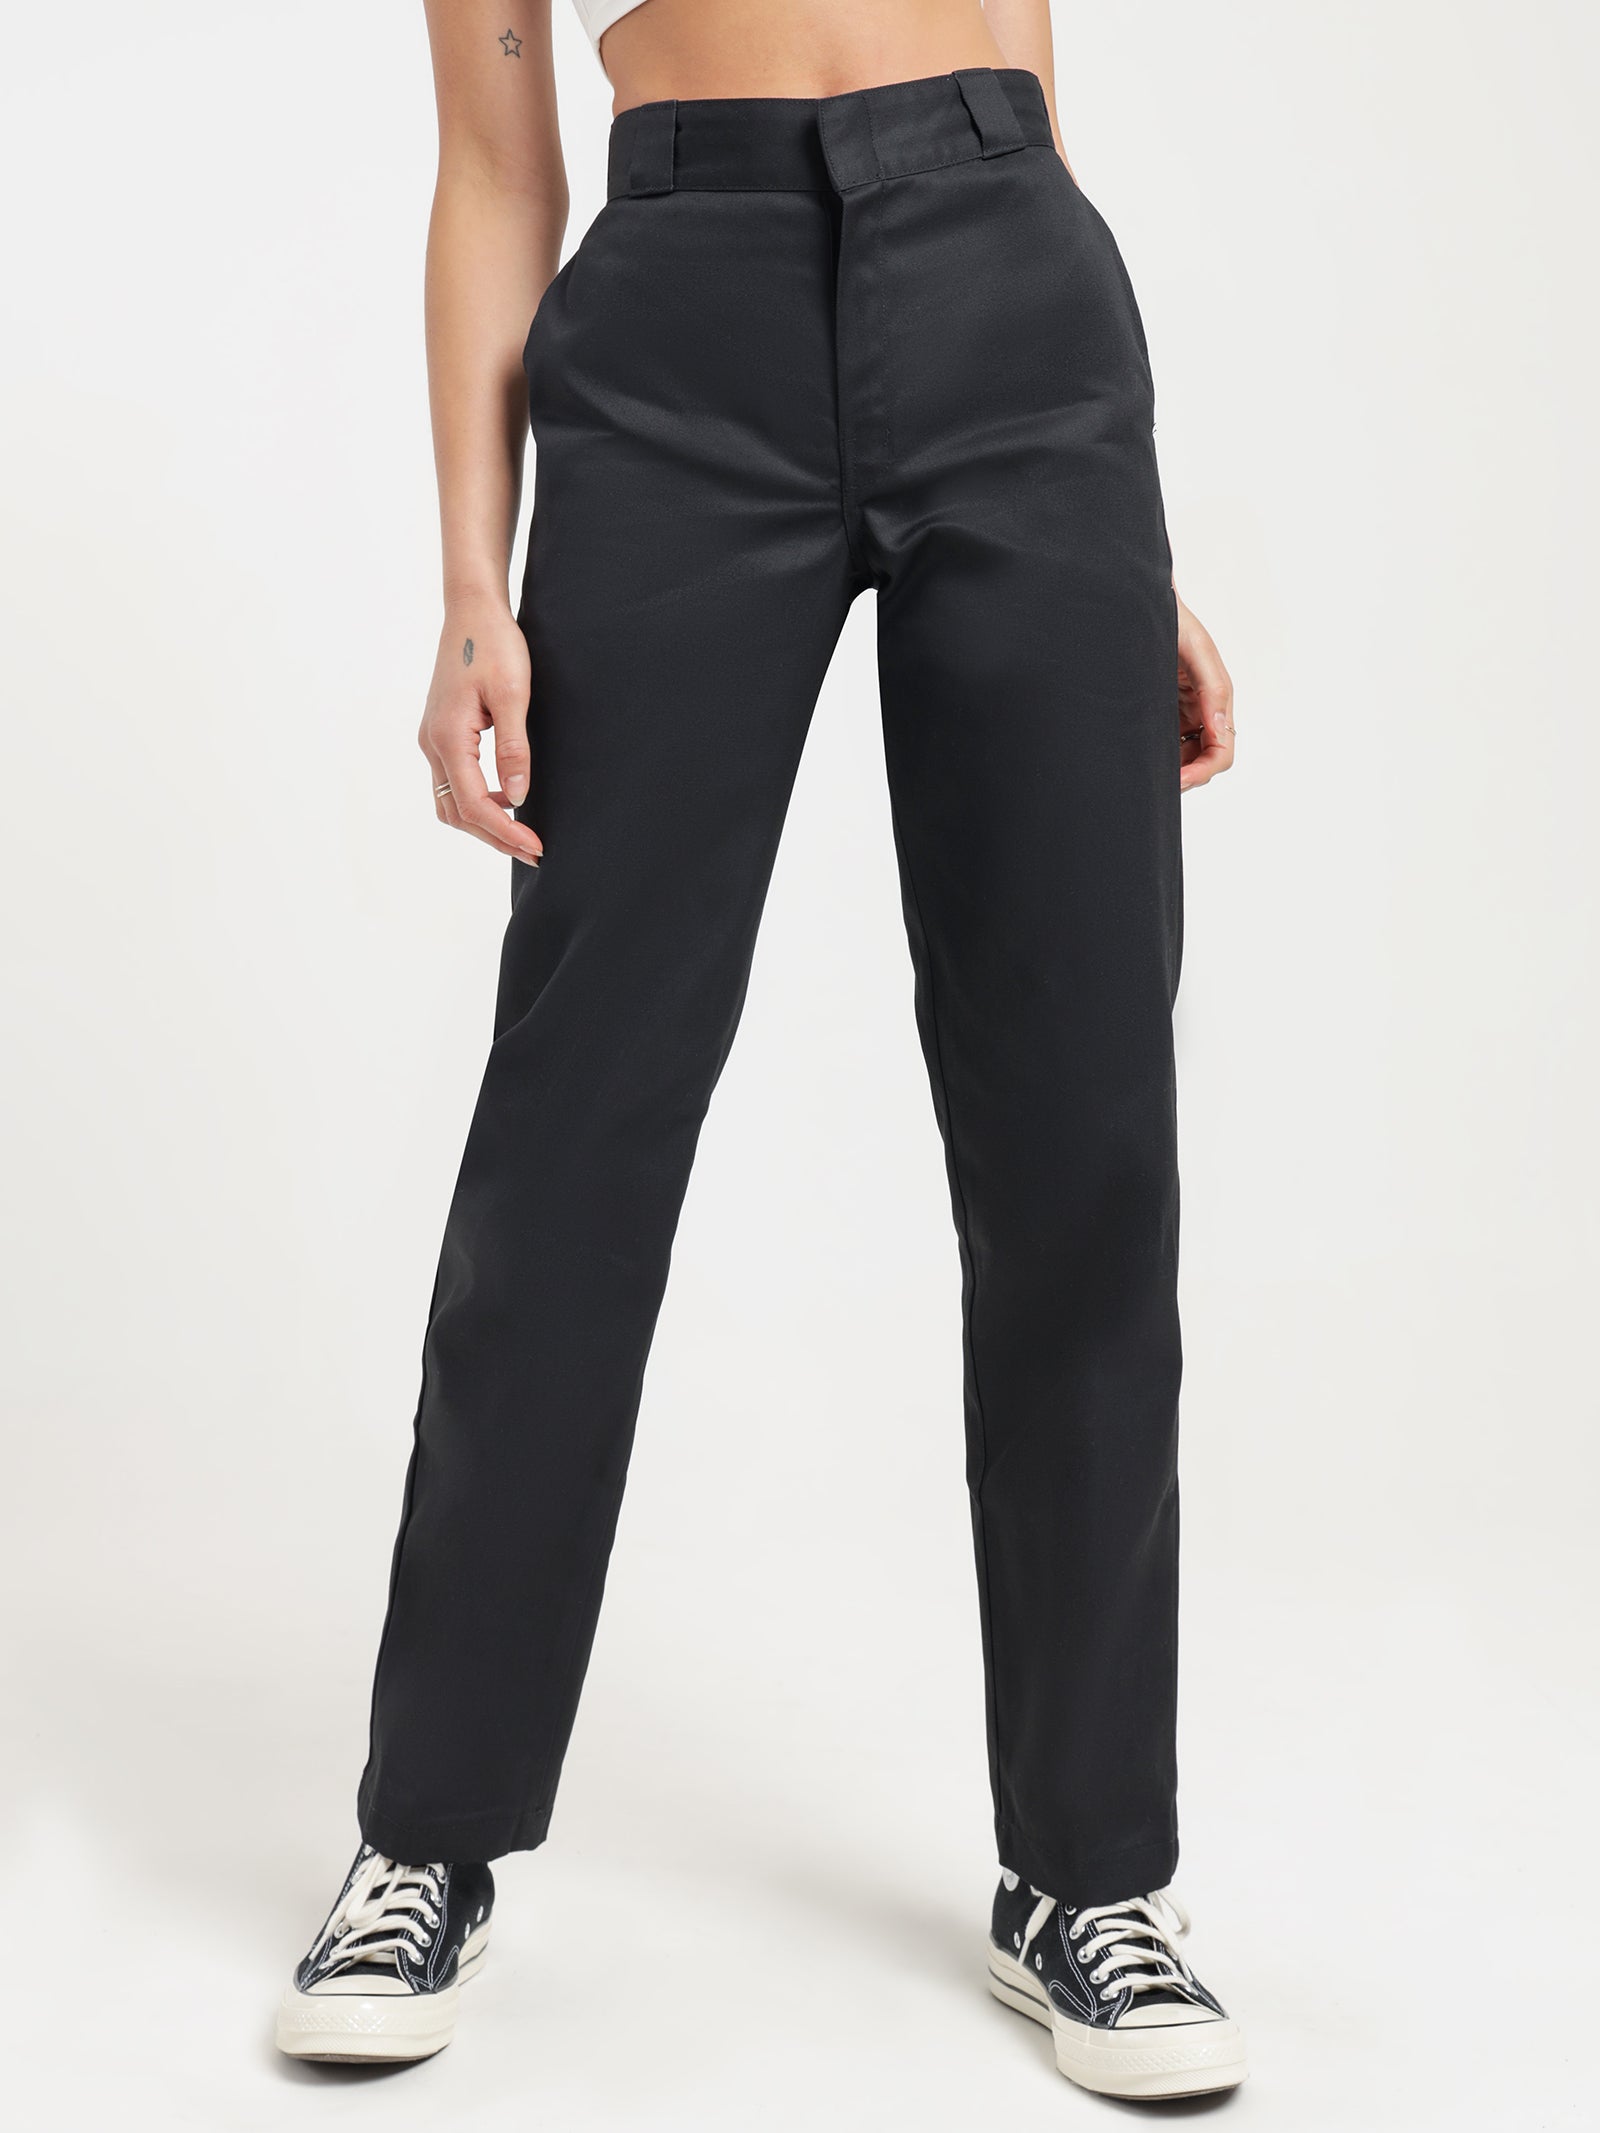 875 Tapered Fit Women's Pant